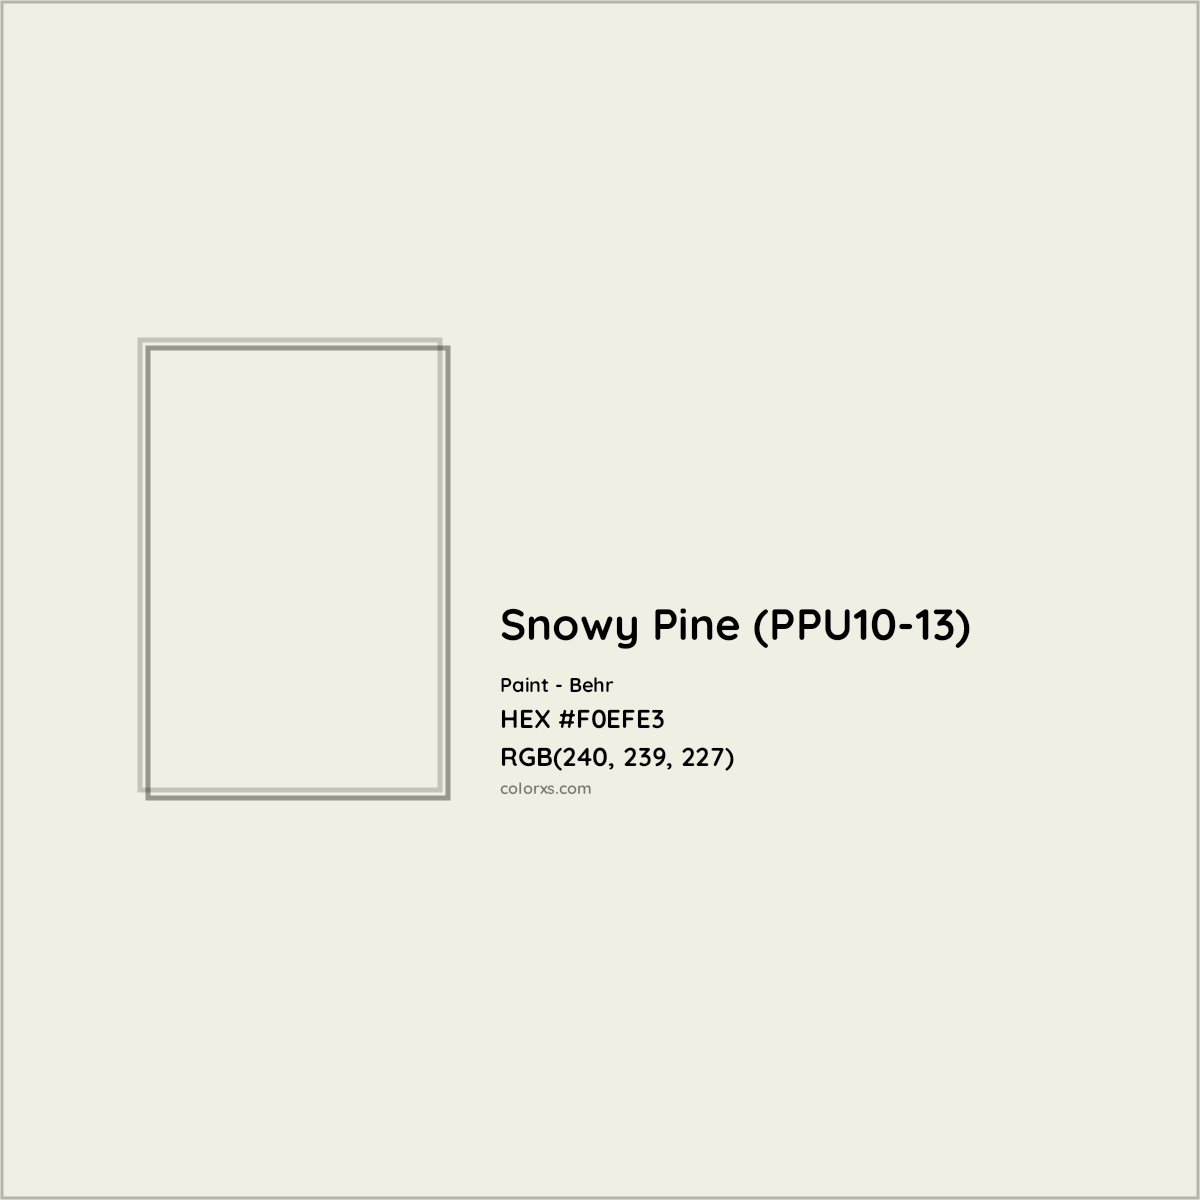 HEX #F0EFE3 Snowy Pine (PPU10-13) Paint Behr - Color Code